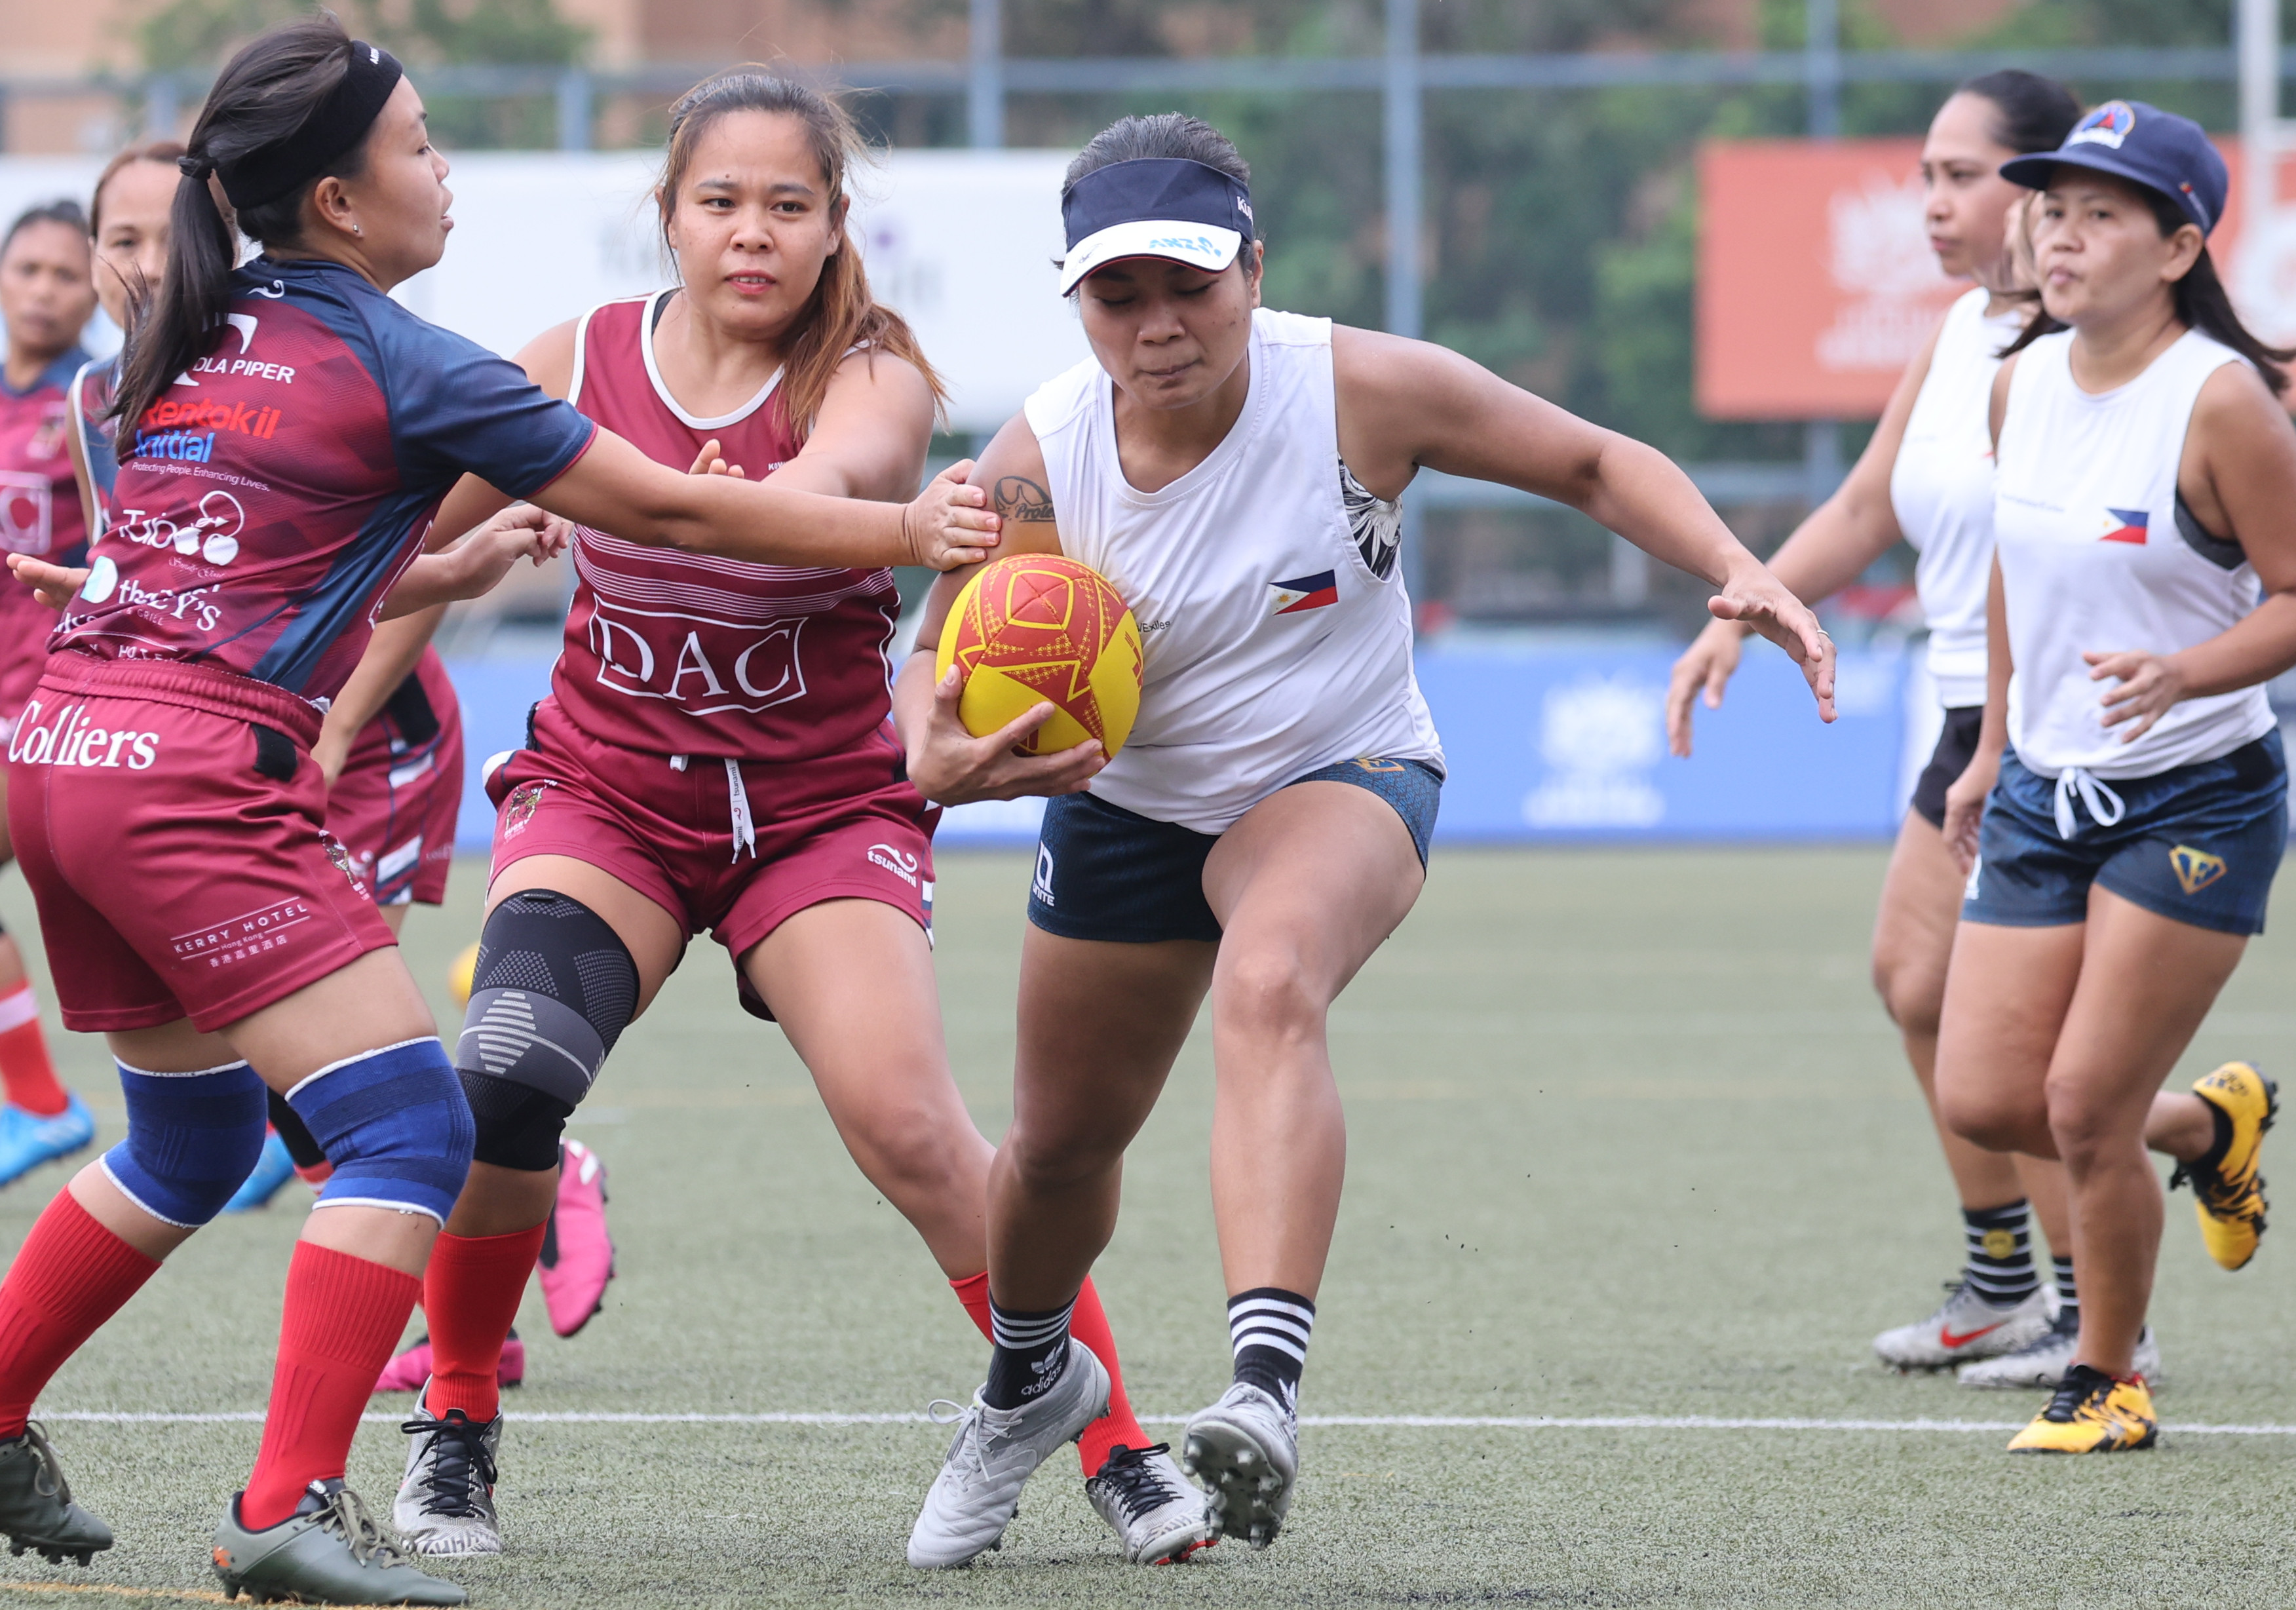 Foreign domestic workers in Hong Kong put up an exhibition match at last year’s Fat Boy 10s rugby tournament, at King’s Park in Kowloon on September 10. Domestic workers are also daughters, sisters and mothers, and have accomplishments of their own. Photo: Edmond So